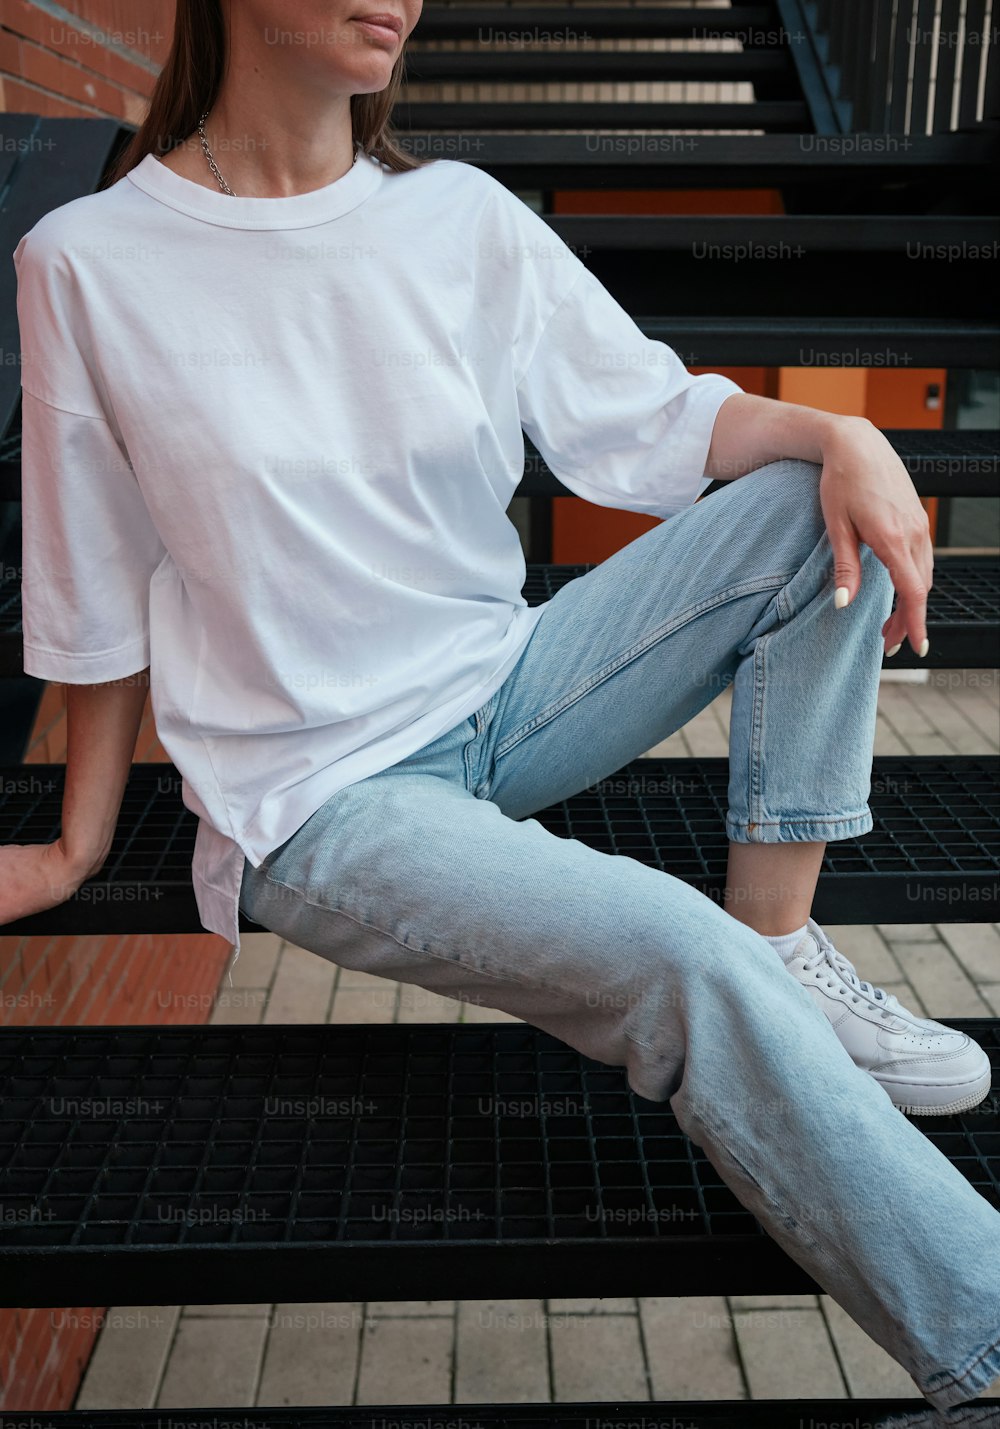 a woman sitting on a set of stairs wearing a white shirt and jeans